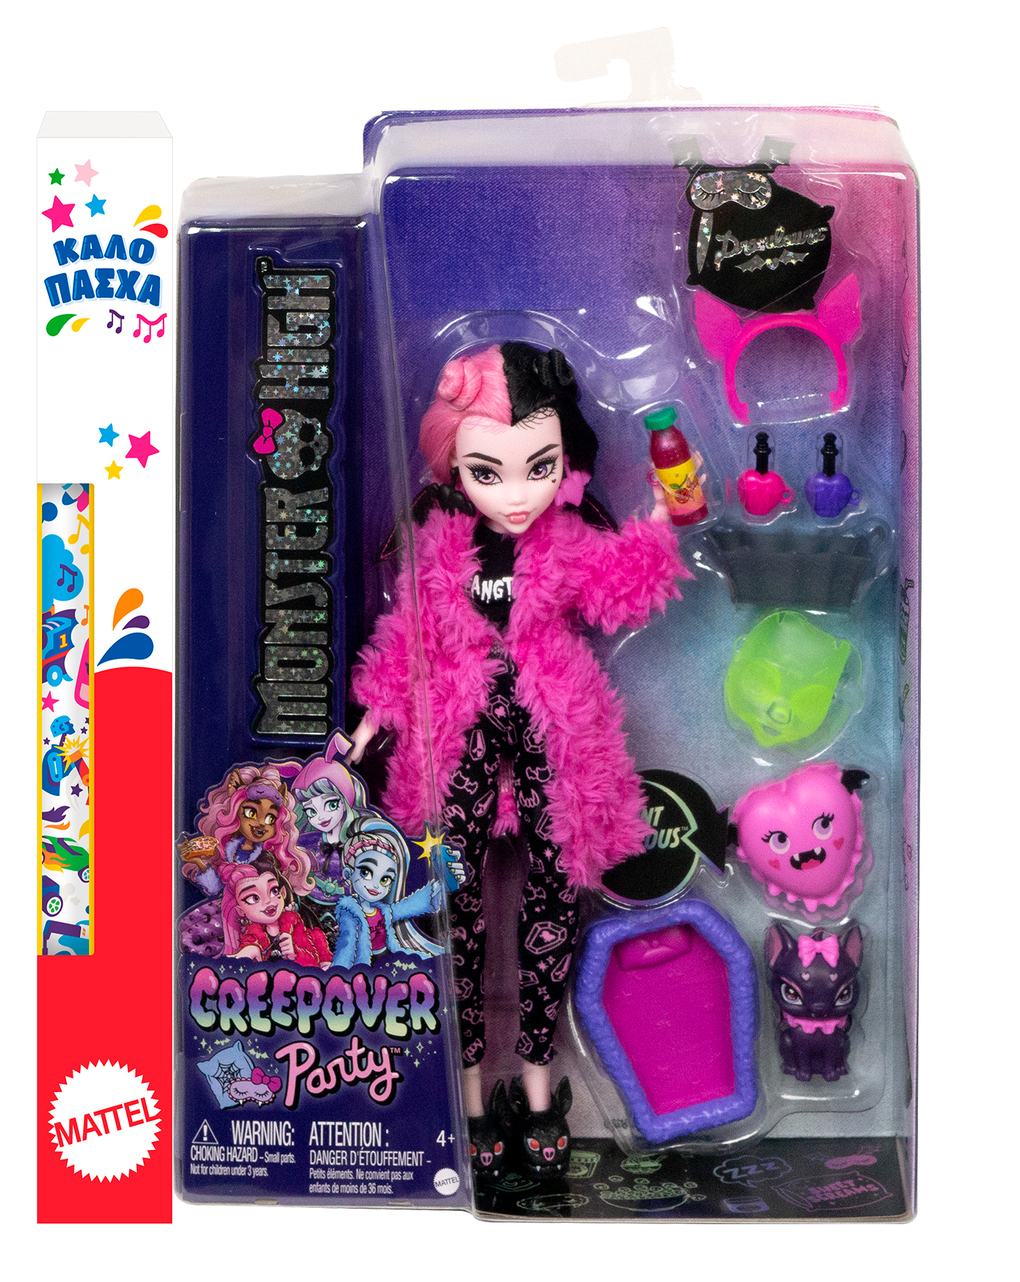 Monster high λαμπάδα κούκλα και αξεσουάρ ντρακουλόρα hky66